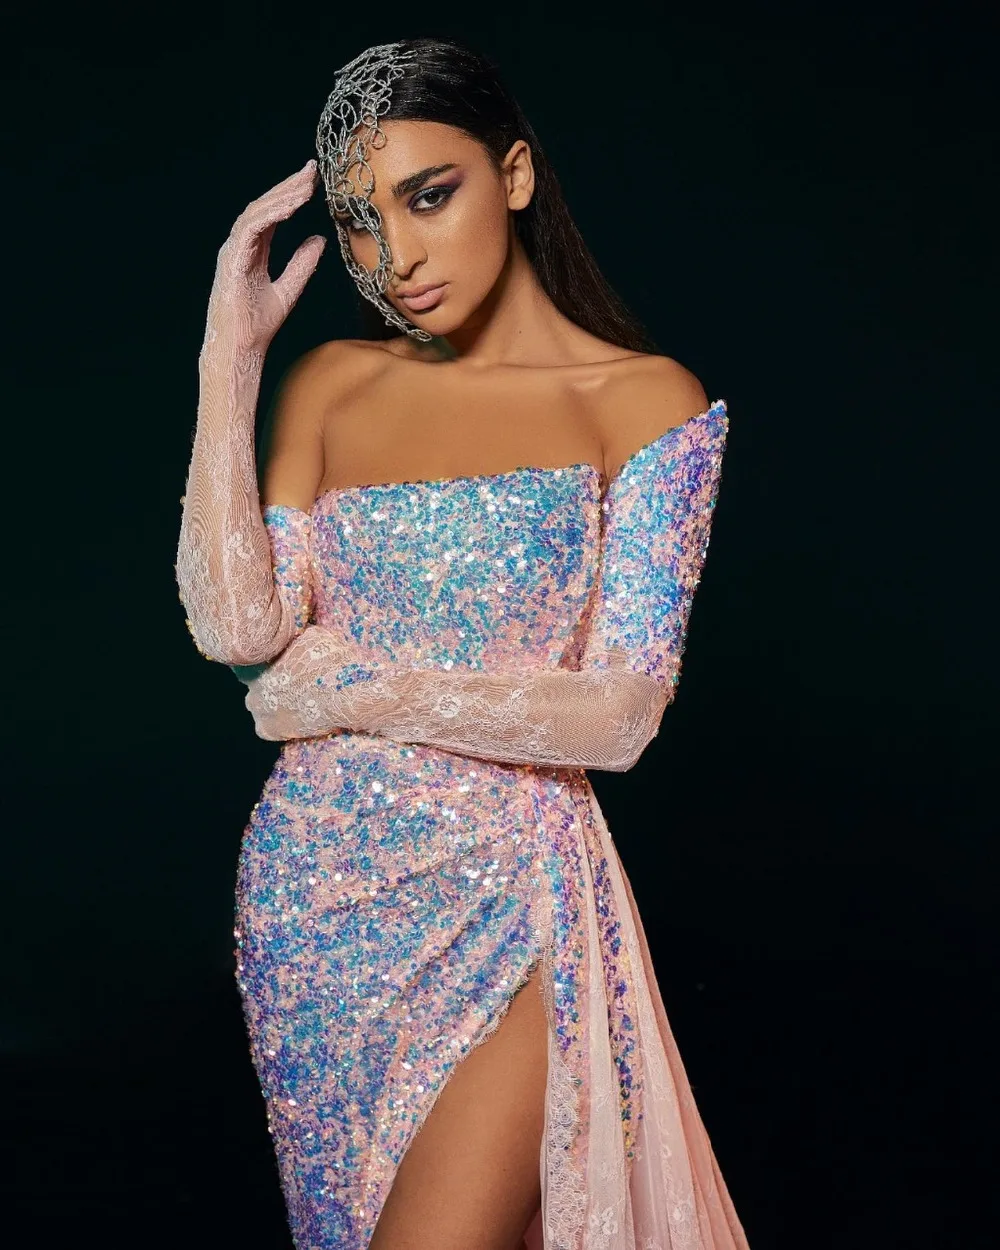 Colorful Shiny Pink Sequined Prom Dresses 2021 Sexy Off The Shoulder High Split Lace Prom Gowns With Long Gloves pretty prom dresses